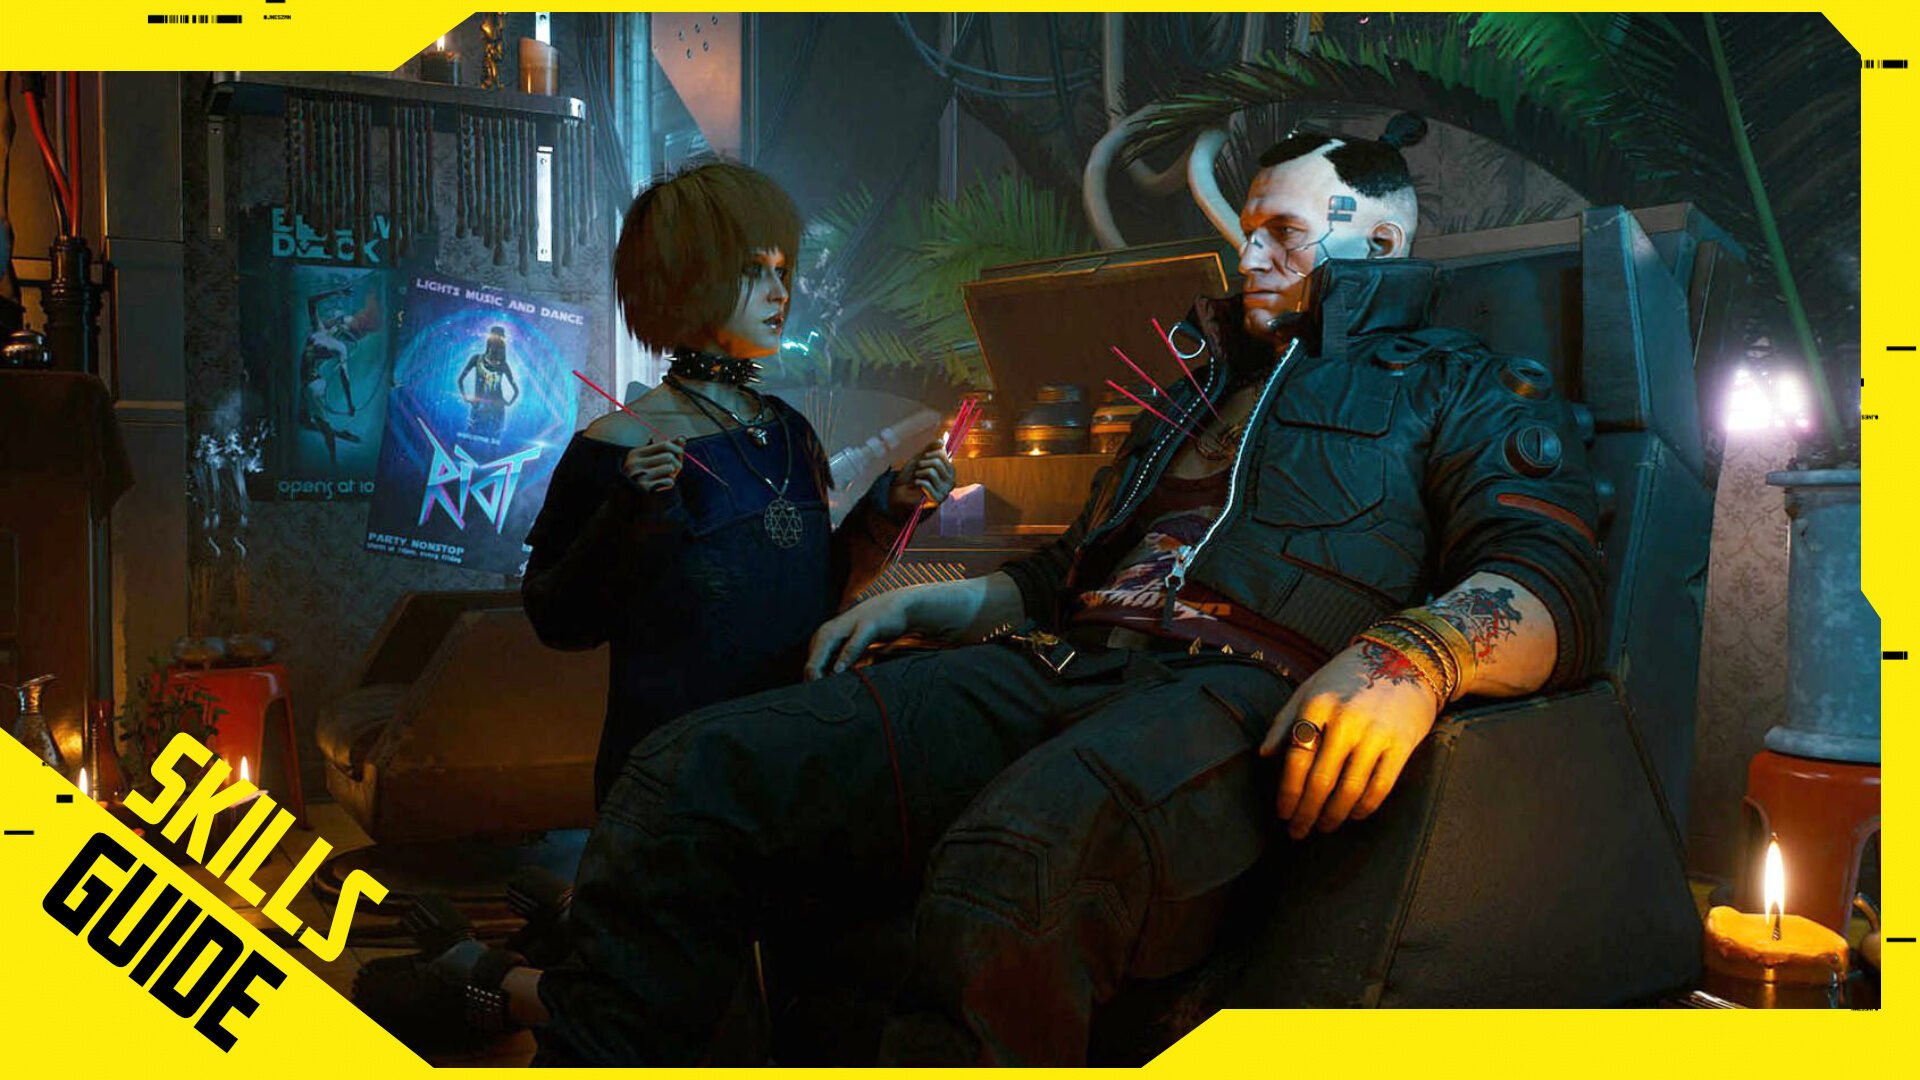 Cyberpunk 2077 Now Has Multiple Edgerunners Locations, Thanks To Mod